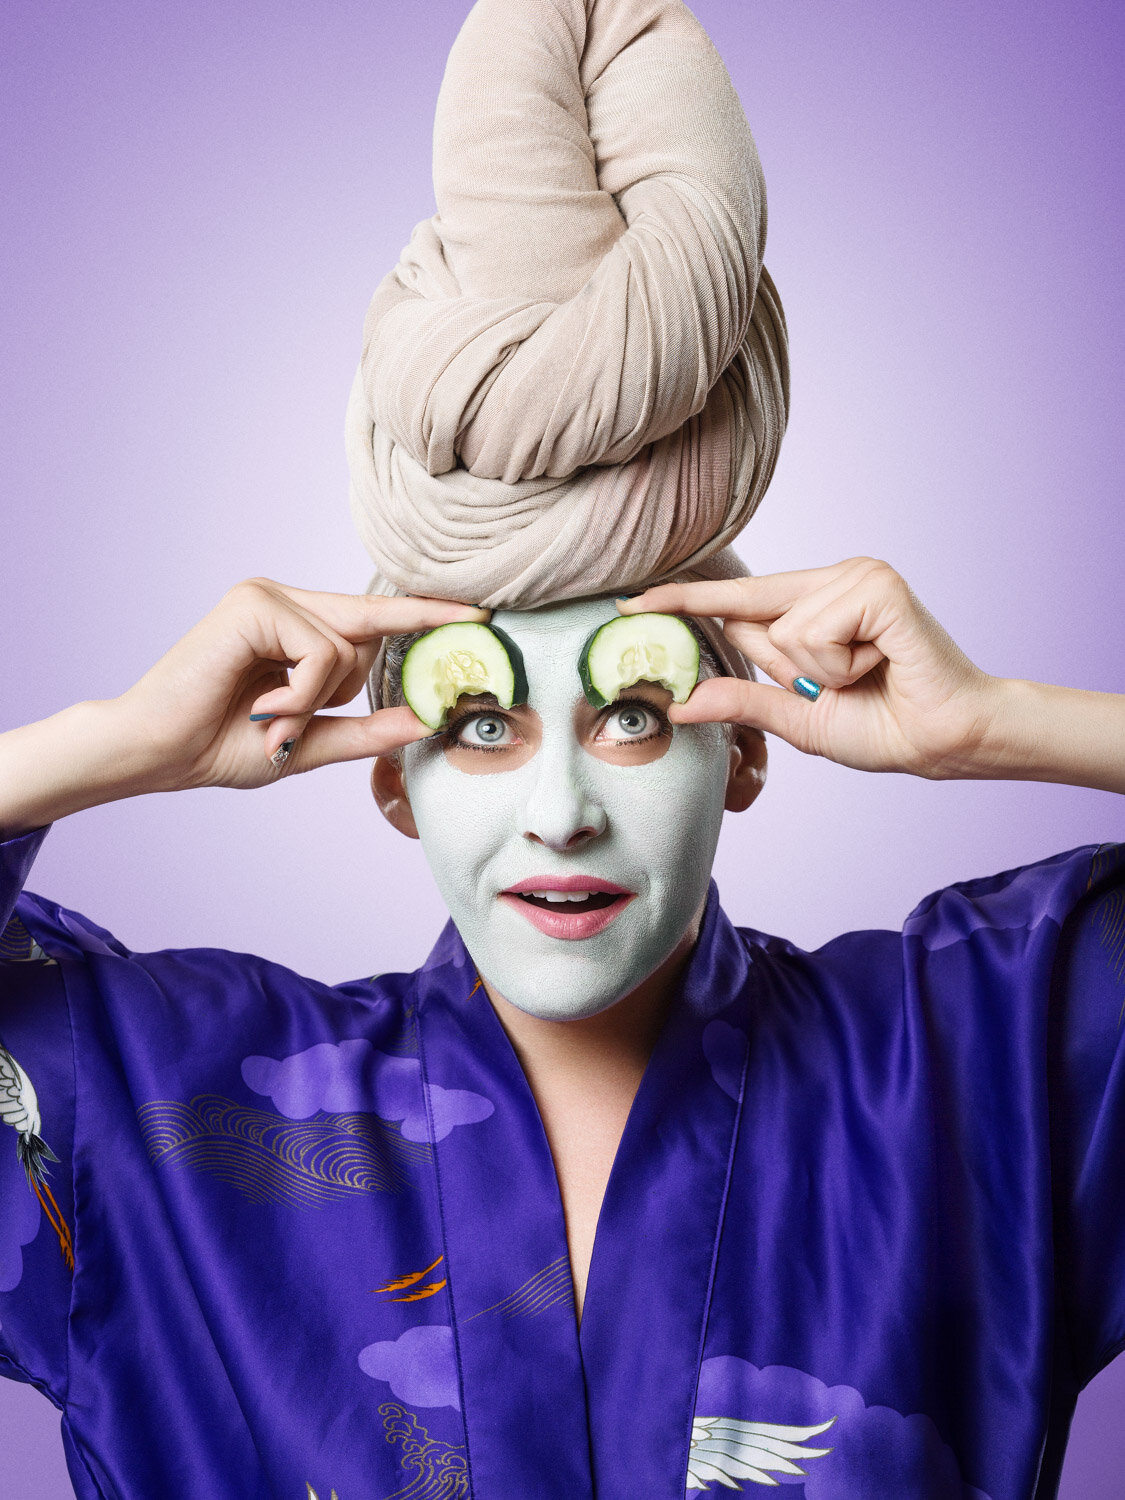 entertainer Michelle Joni eats her spa day cucumbers; creative beauty portrait to promote her business by creative portrait photographer Hanna Agar